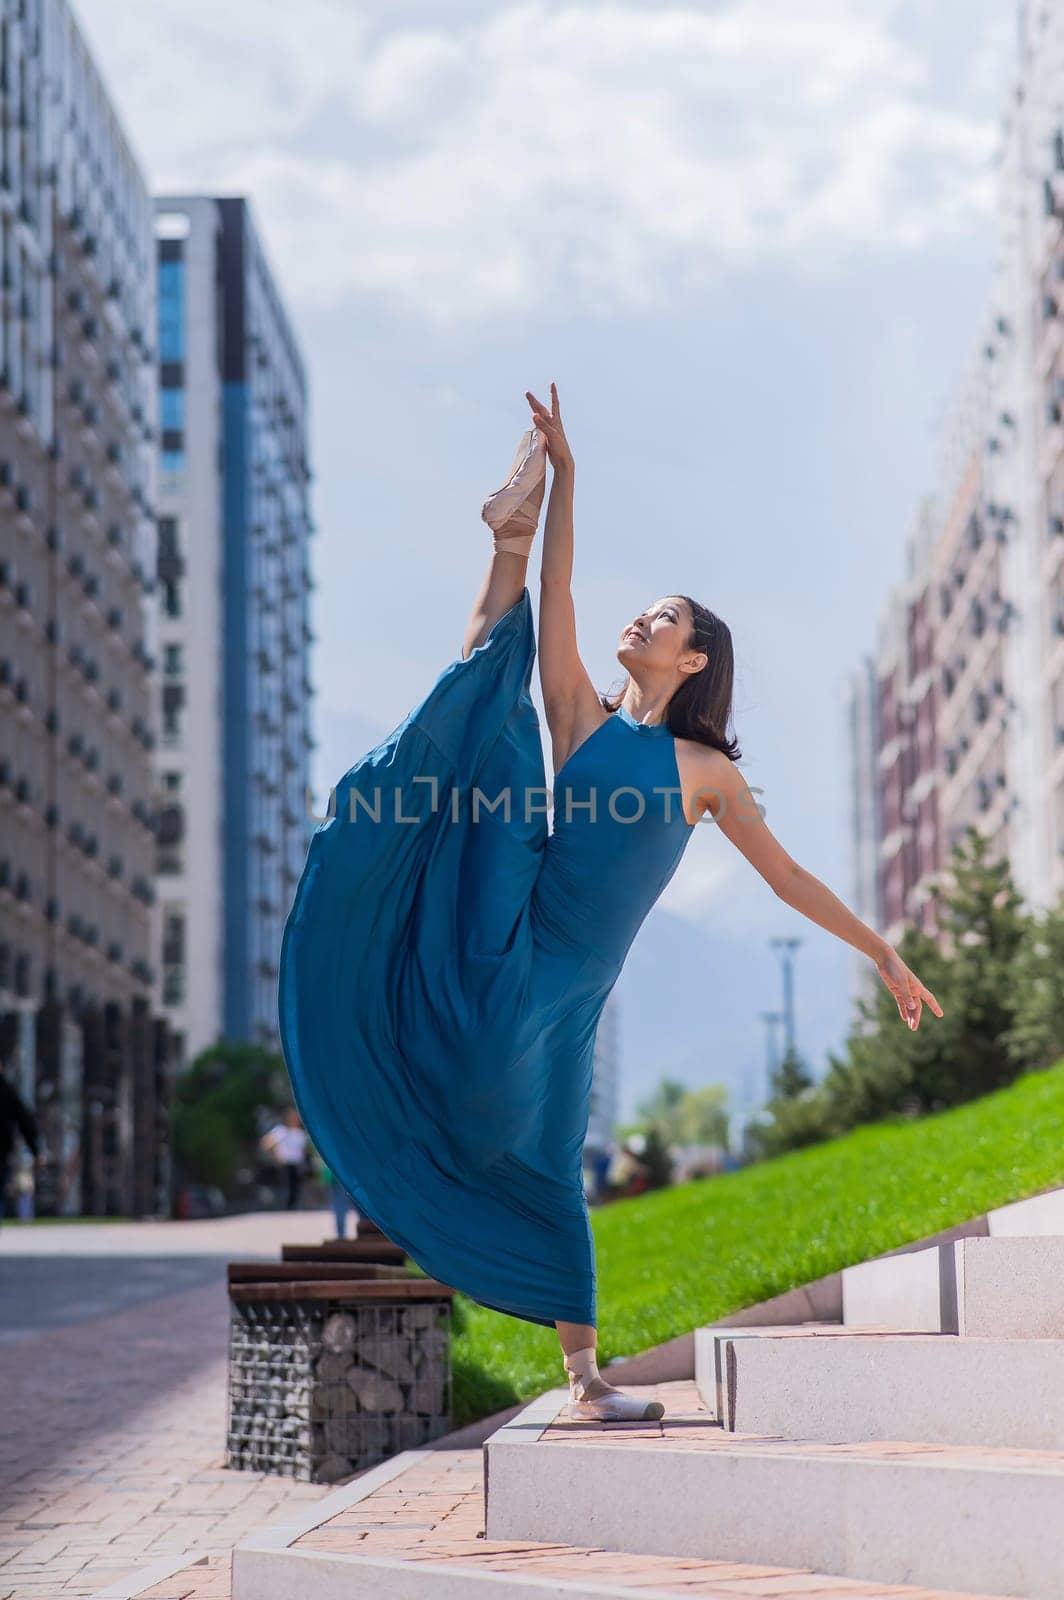 Beautiful Asian ballerina in a blue dress stands on the stairs in the splits outdoors. Urban landscape. Vertical photo. by mrwed54